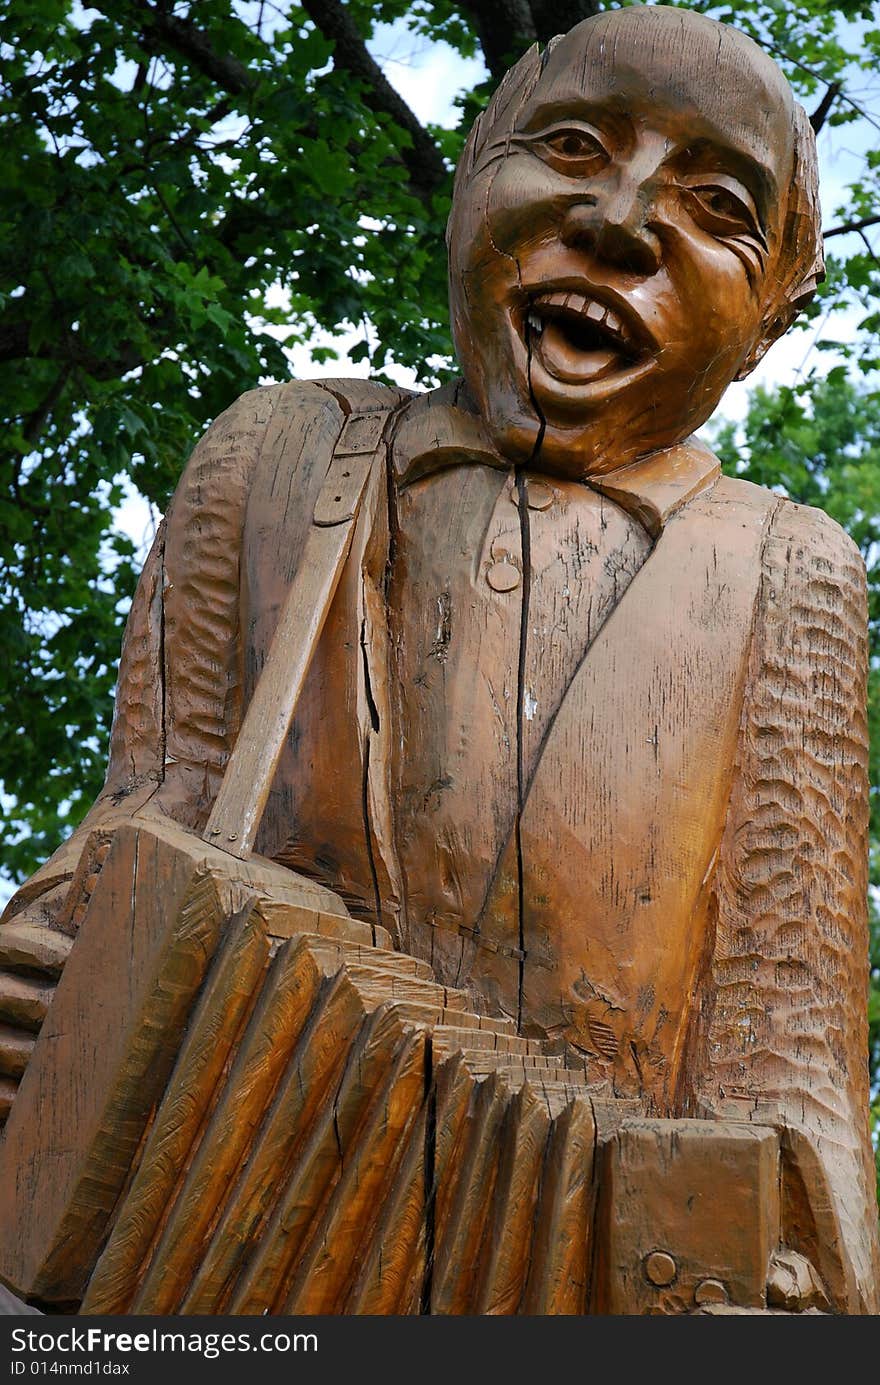 A wooden musician playing an accordion